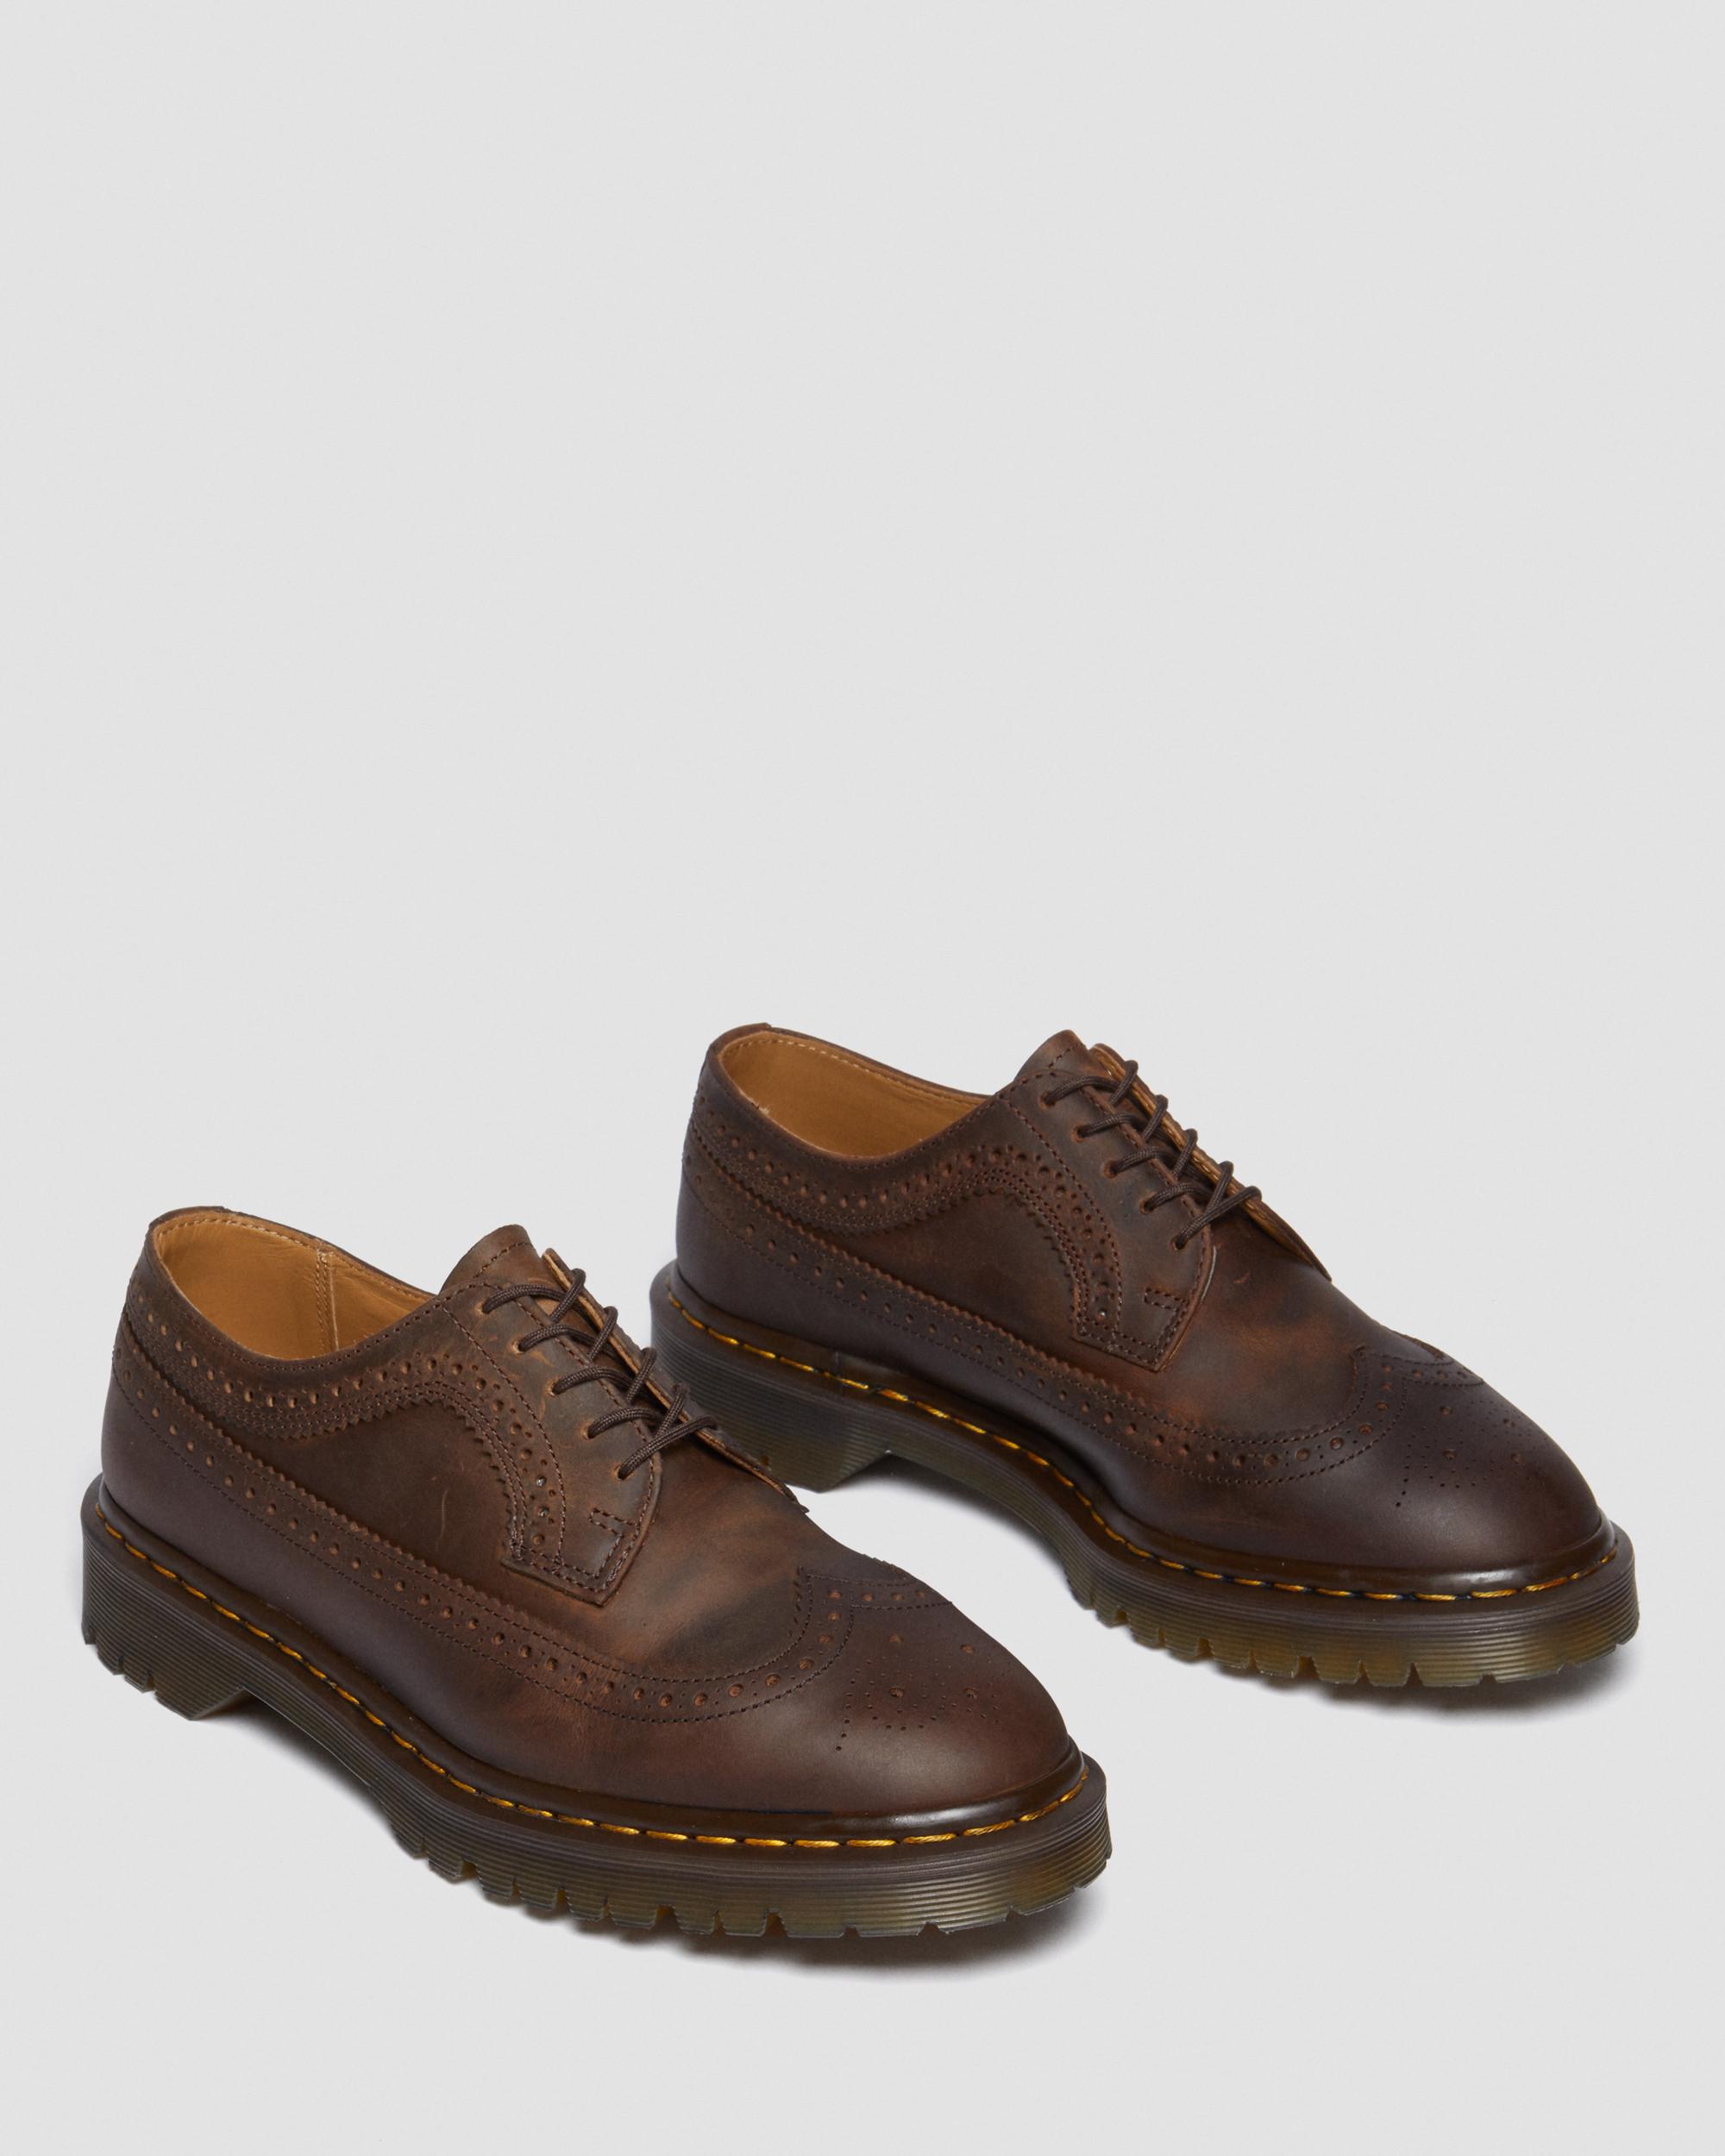 3989 Brogue Crazy Horse Leather Shoes in Brown